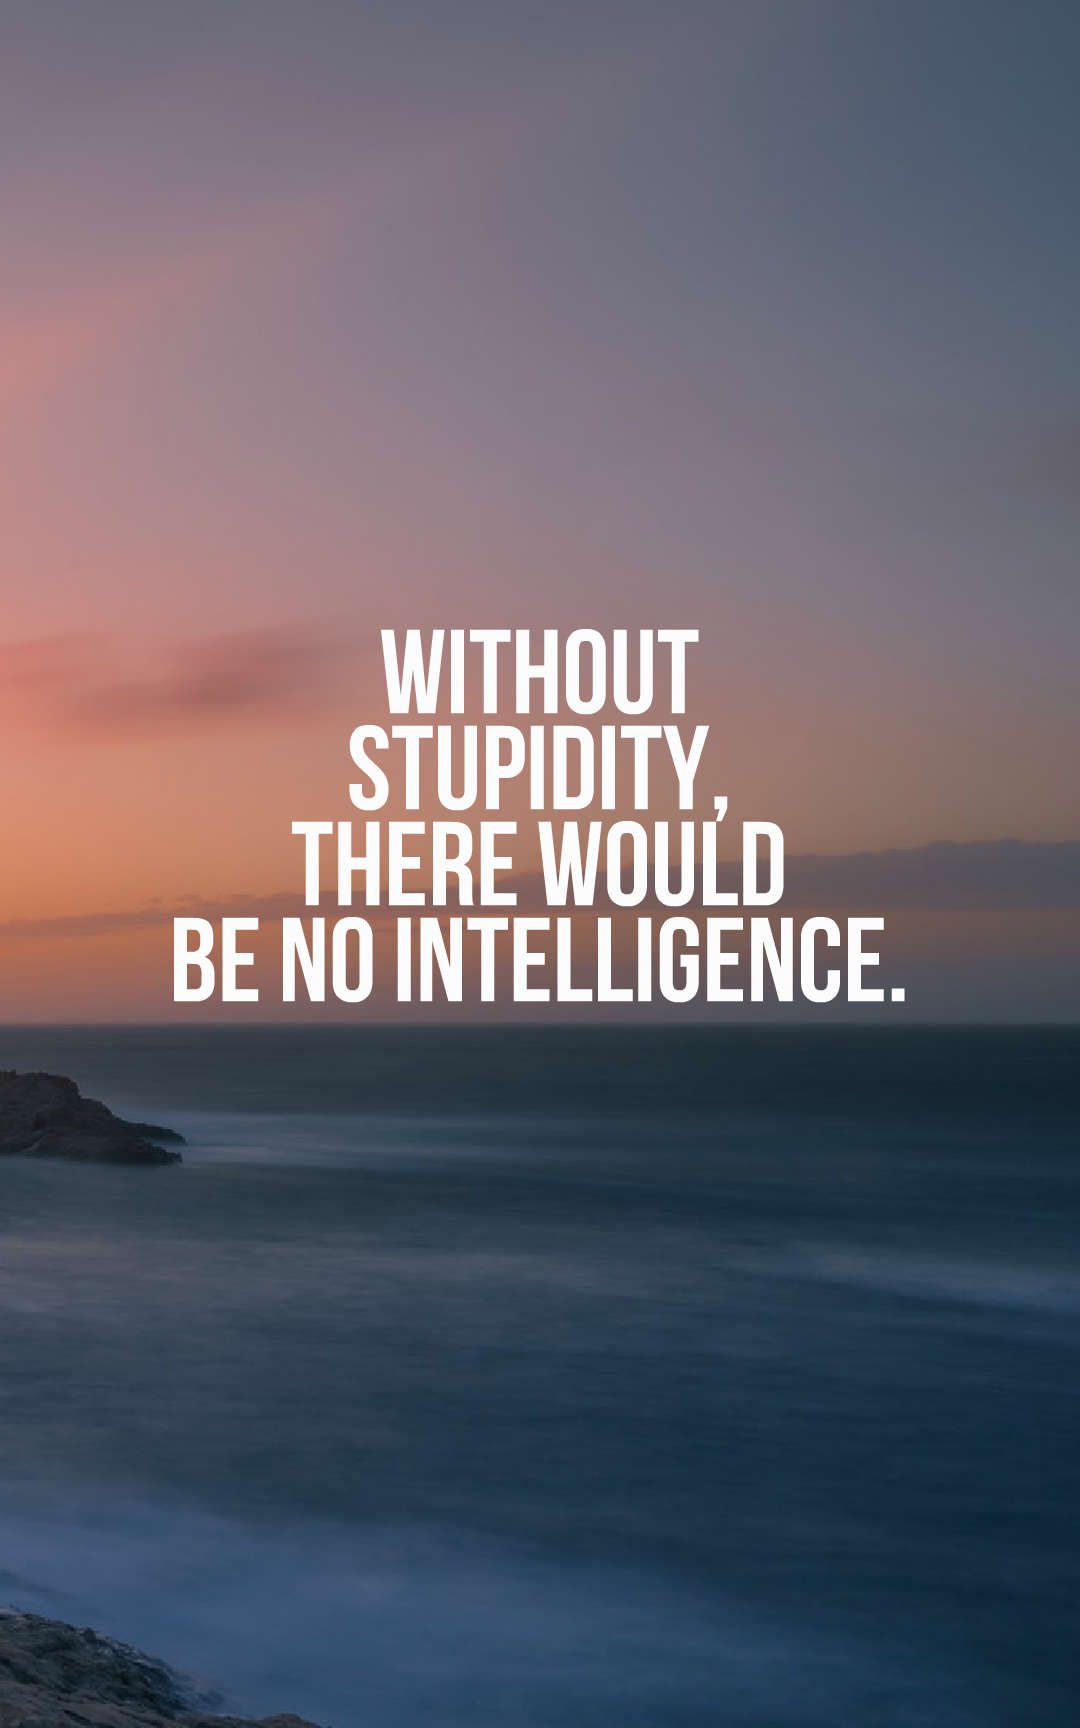 Stupidity Quotes: 45 Quotes About Stupidity and Ignorance